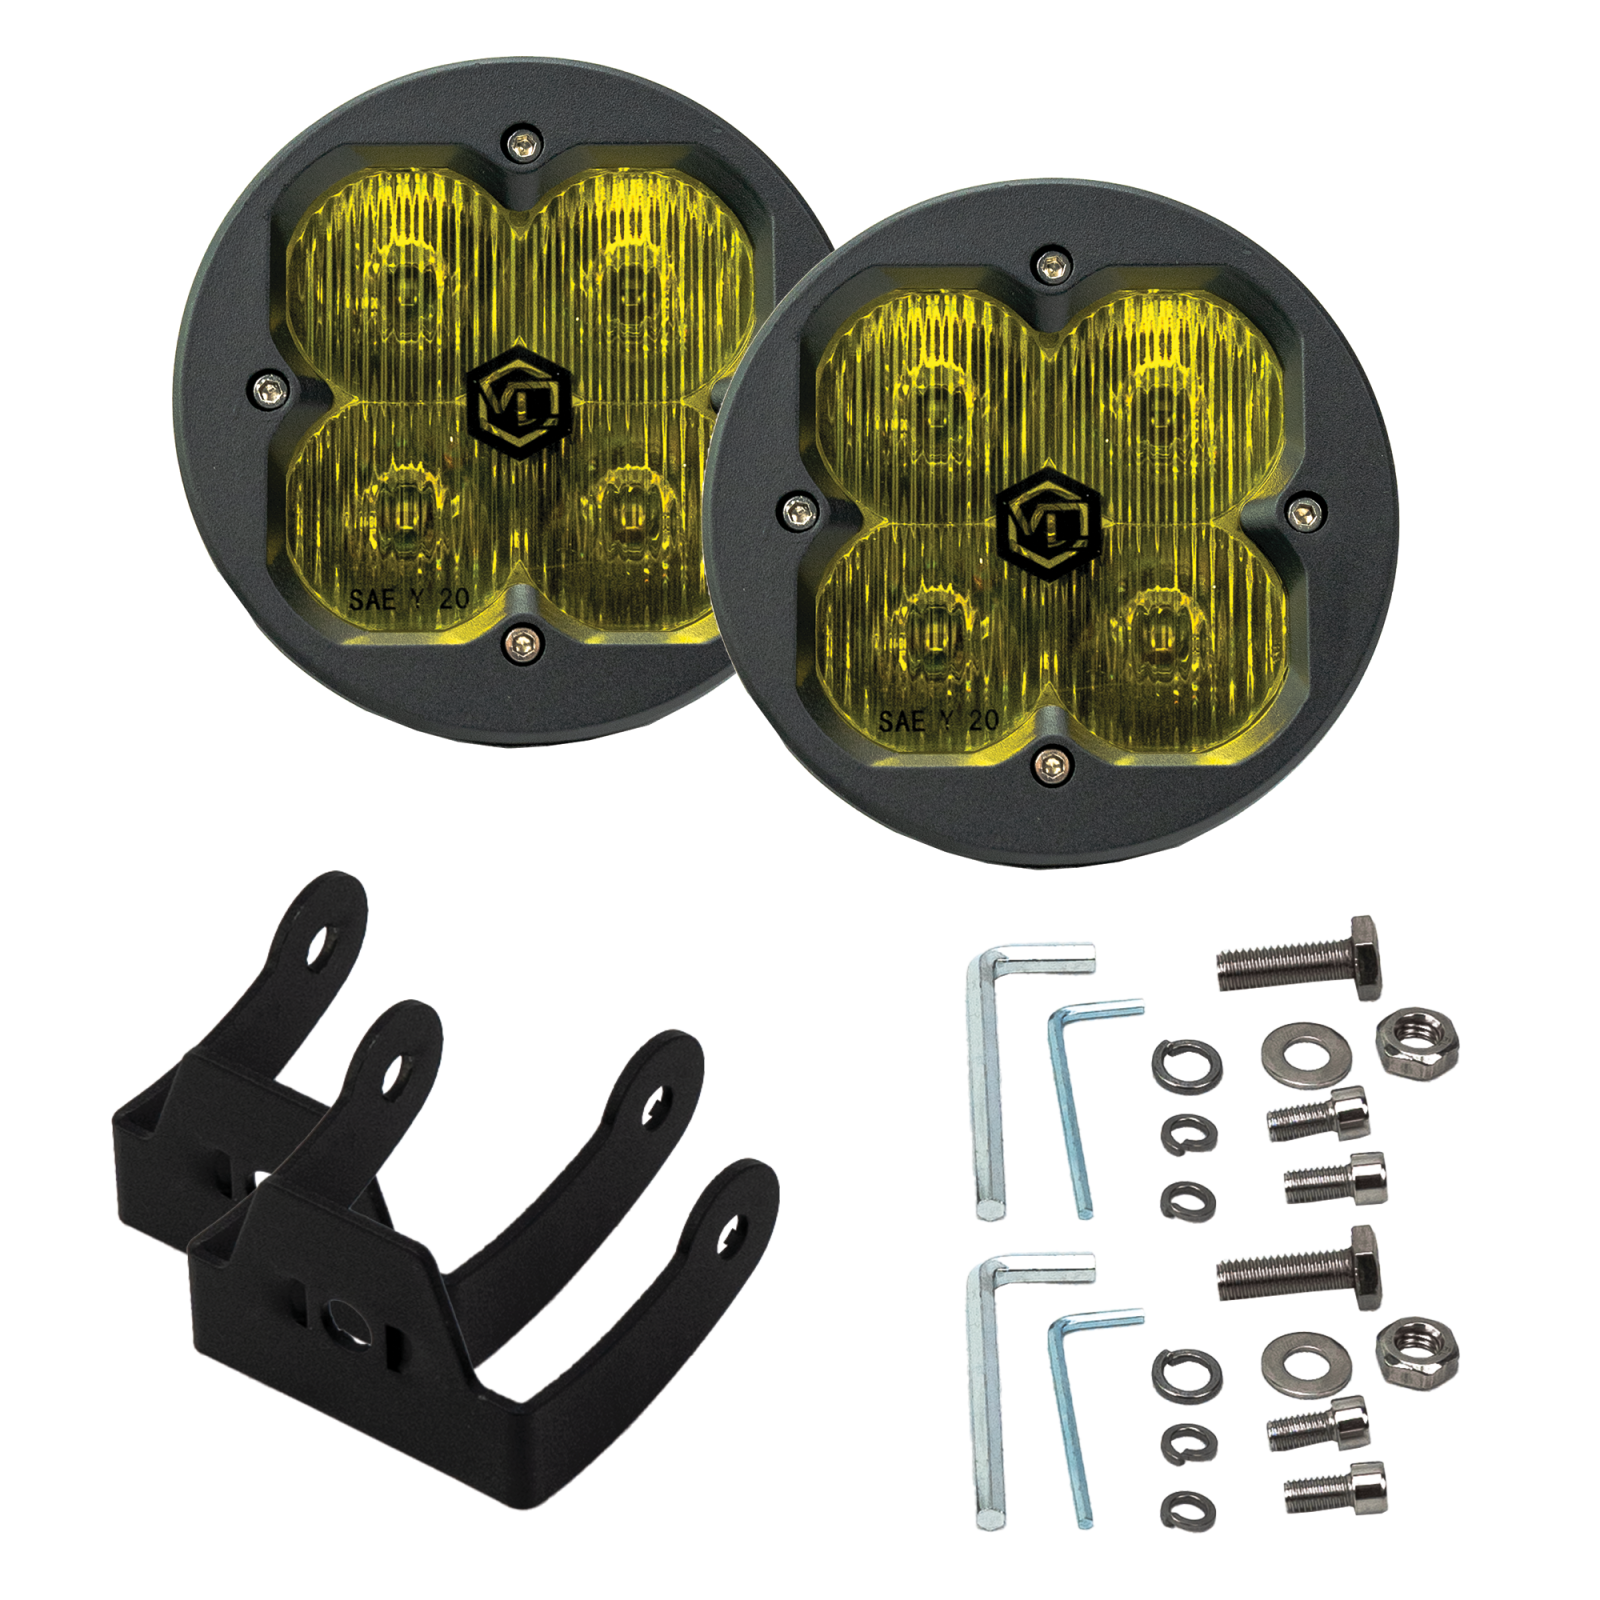 Vivid 11120 FNG SAE 3 Inch 20W Driving Light Pods With Round Amber DOT/SAE Pair | GarageAndFab.com